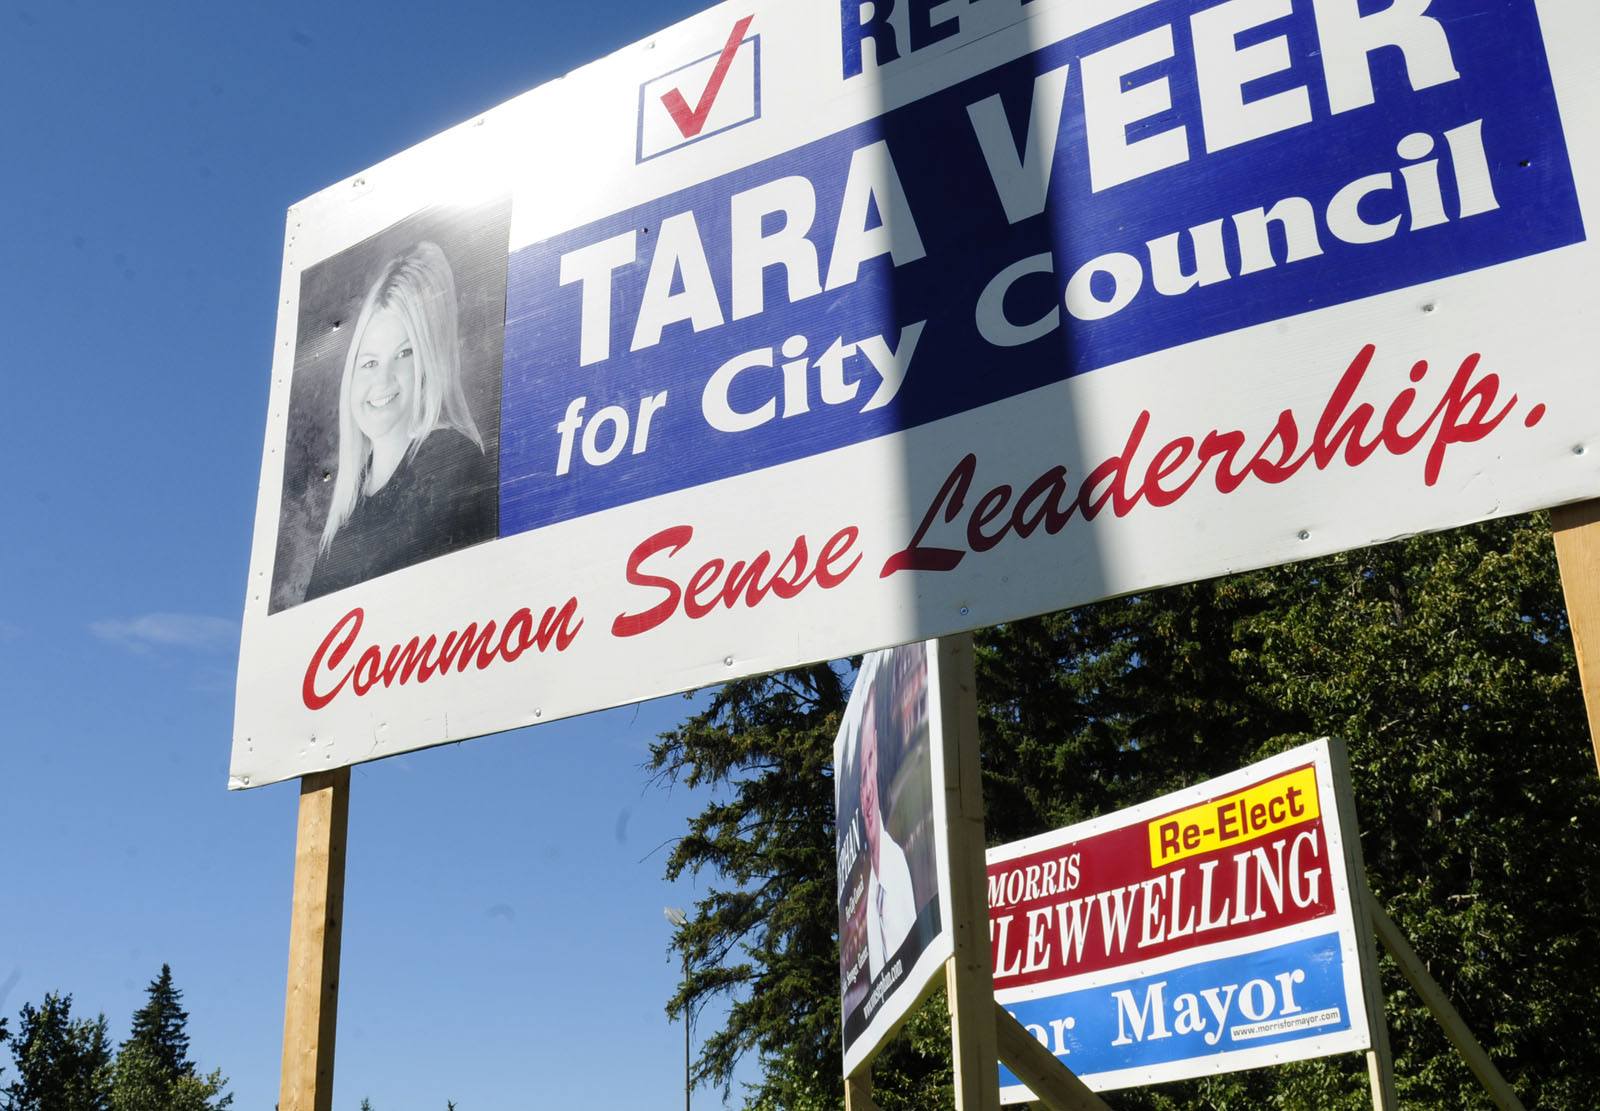 Campaign signs have been popping up all over as candidates for City council prepare for the upcoming election.